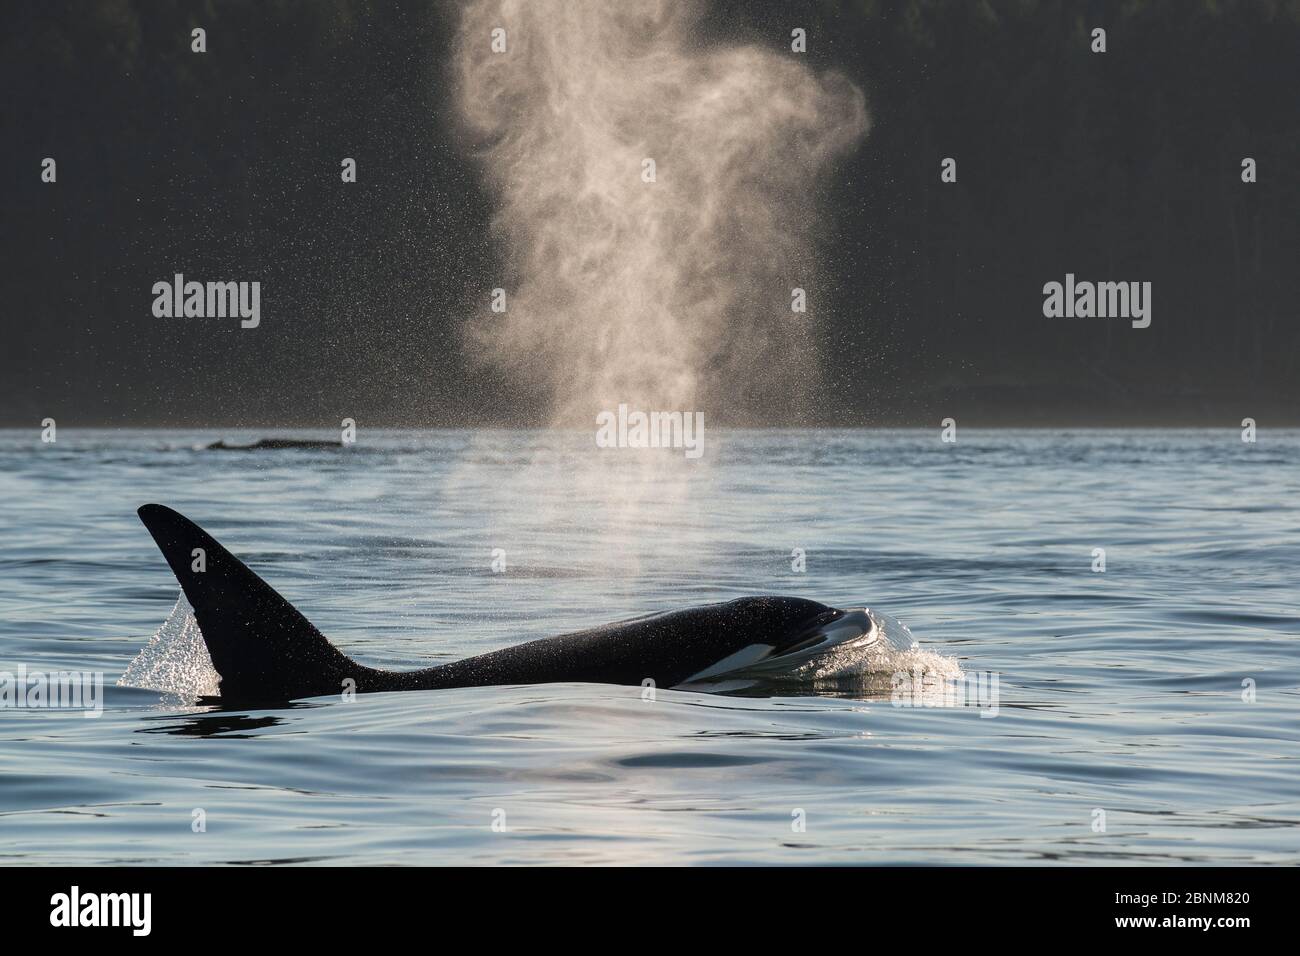 Killer whale / orca (Orcinus orca) transient male blowing at surface, Strait of George, between Washington State, USA, and the Gulf Islands on the eas Stock Photo